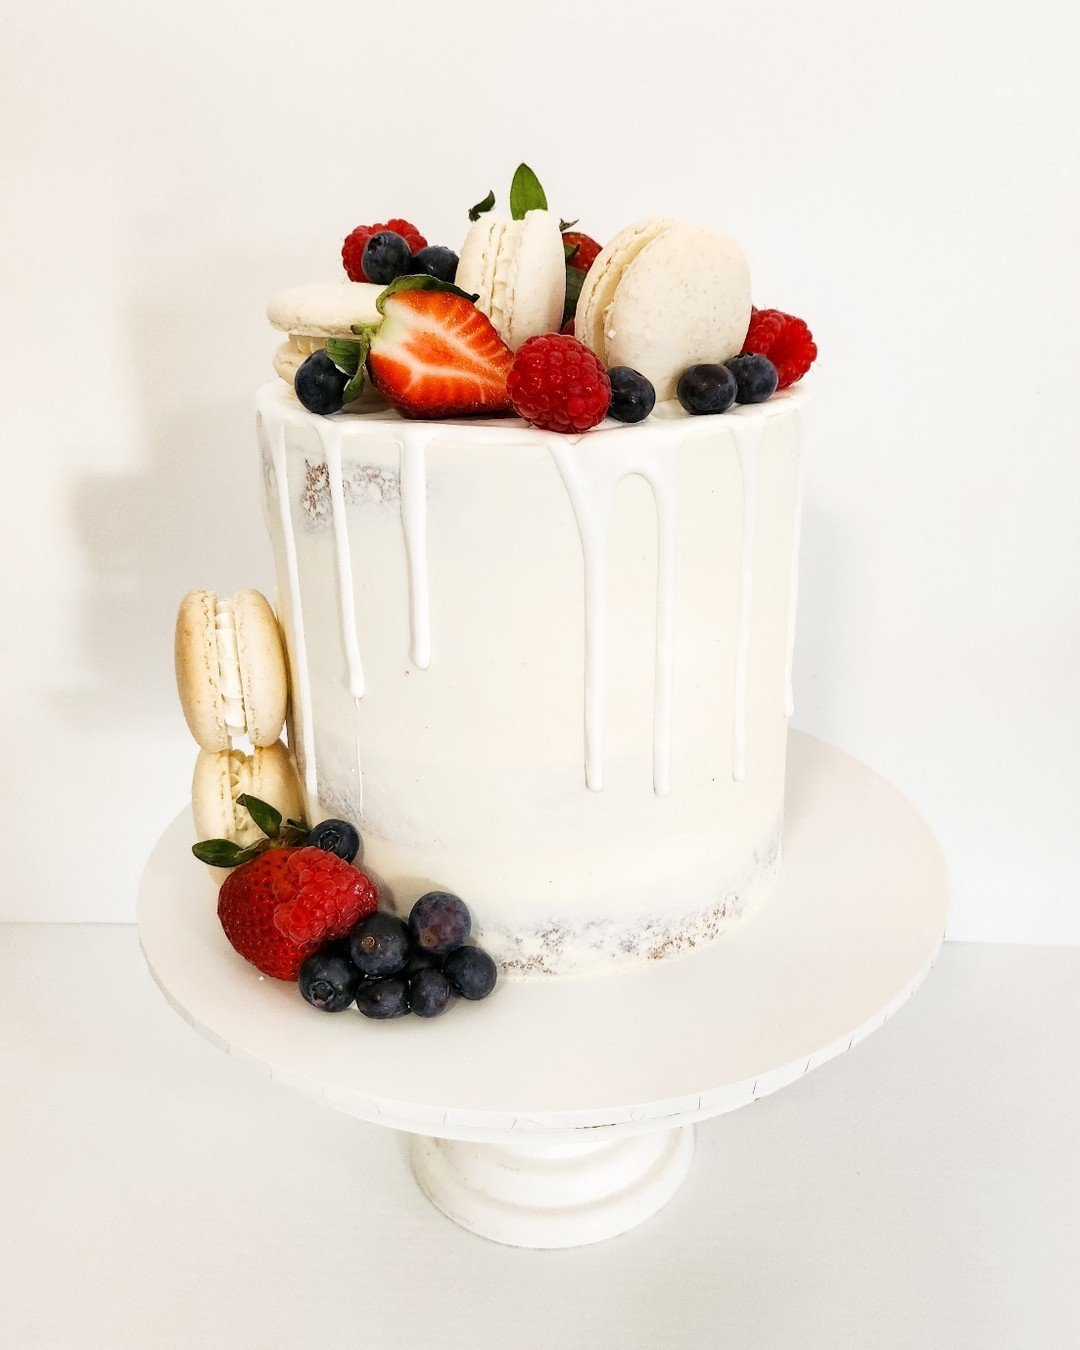 Celebrate with Cake! 🍰Turning your engagement into a day of sweetness

Kind Words 💌
&ldquo;Thank you Fiona for helping make our day sonspecial. From initial consultation, to preparing and delivering tasting boxes and finally preparing our cake for 